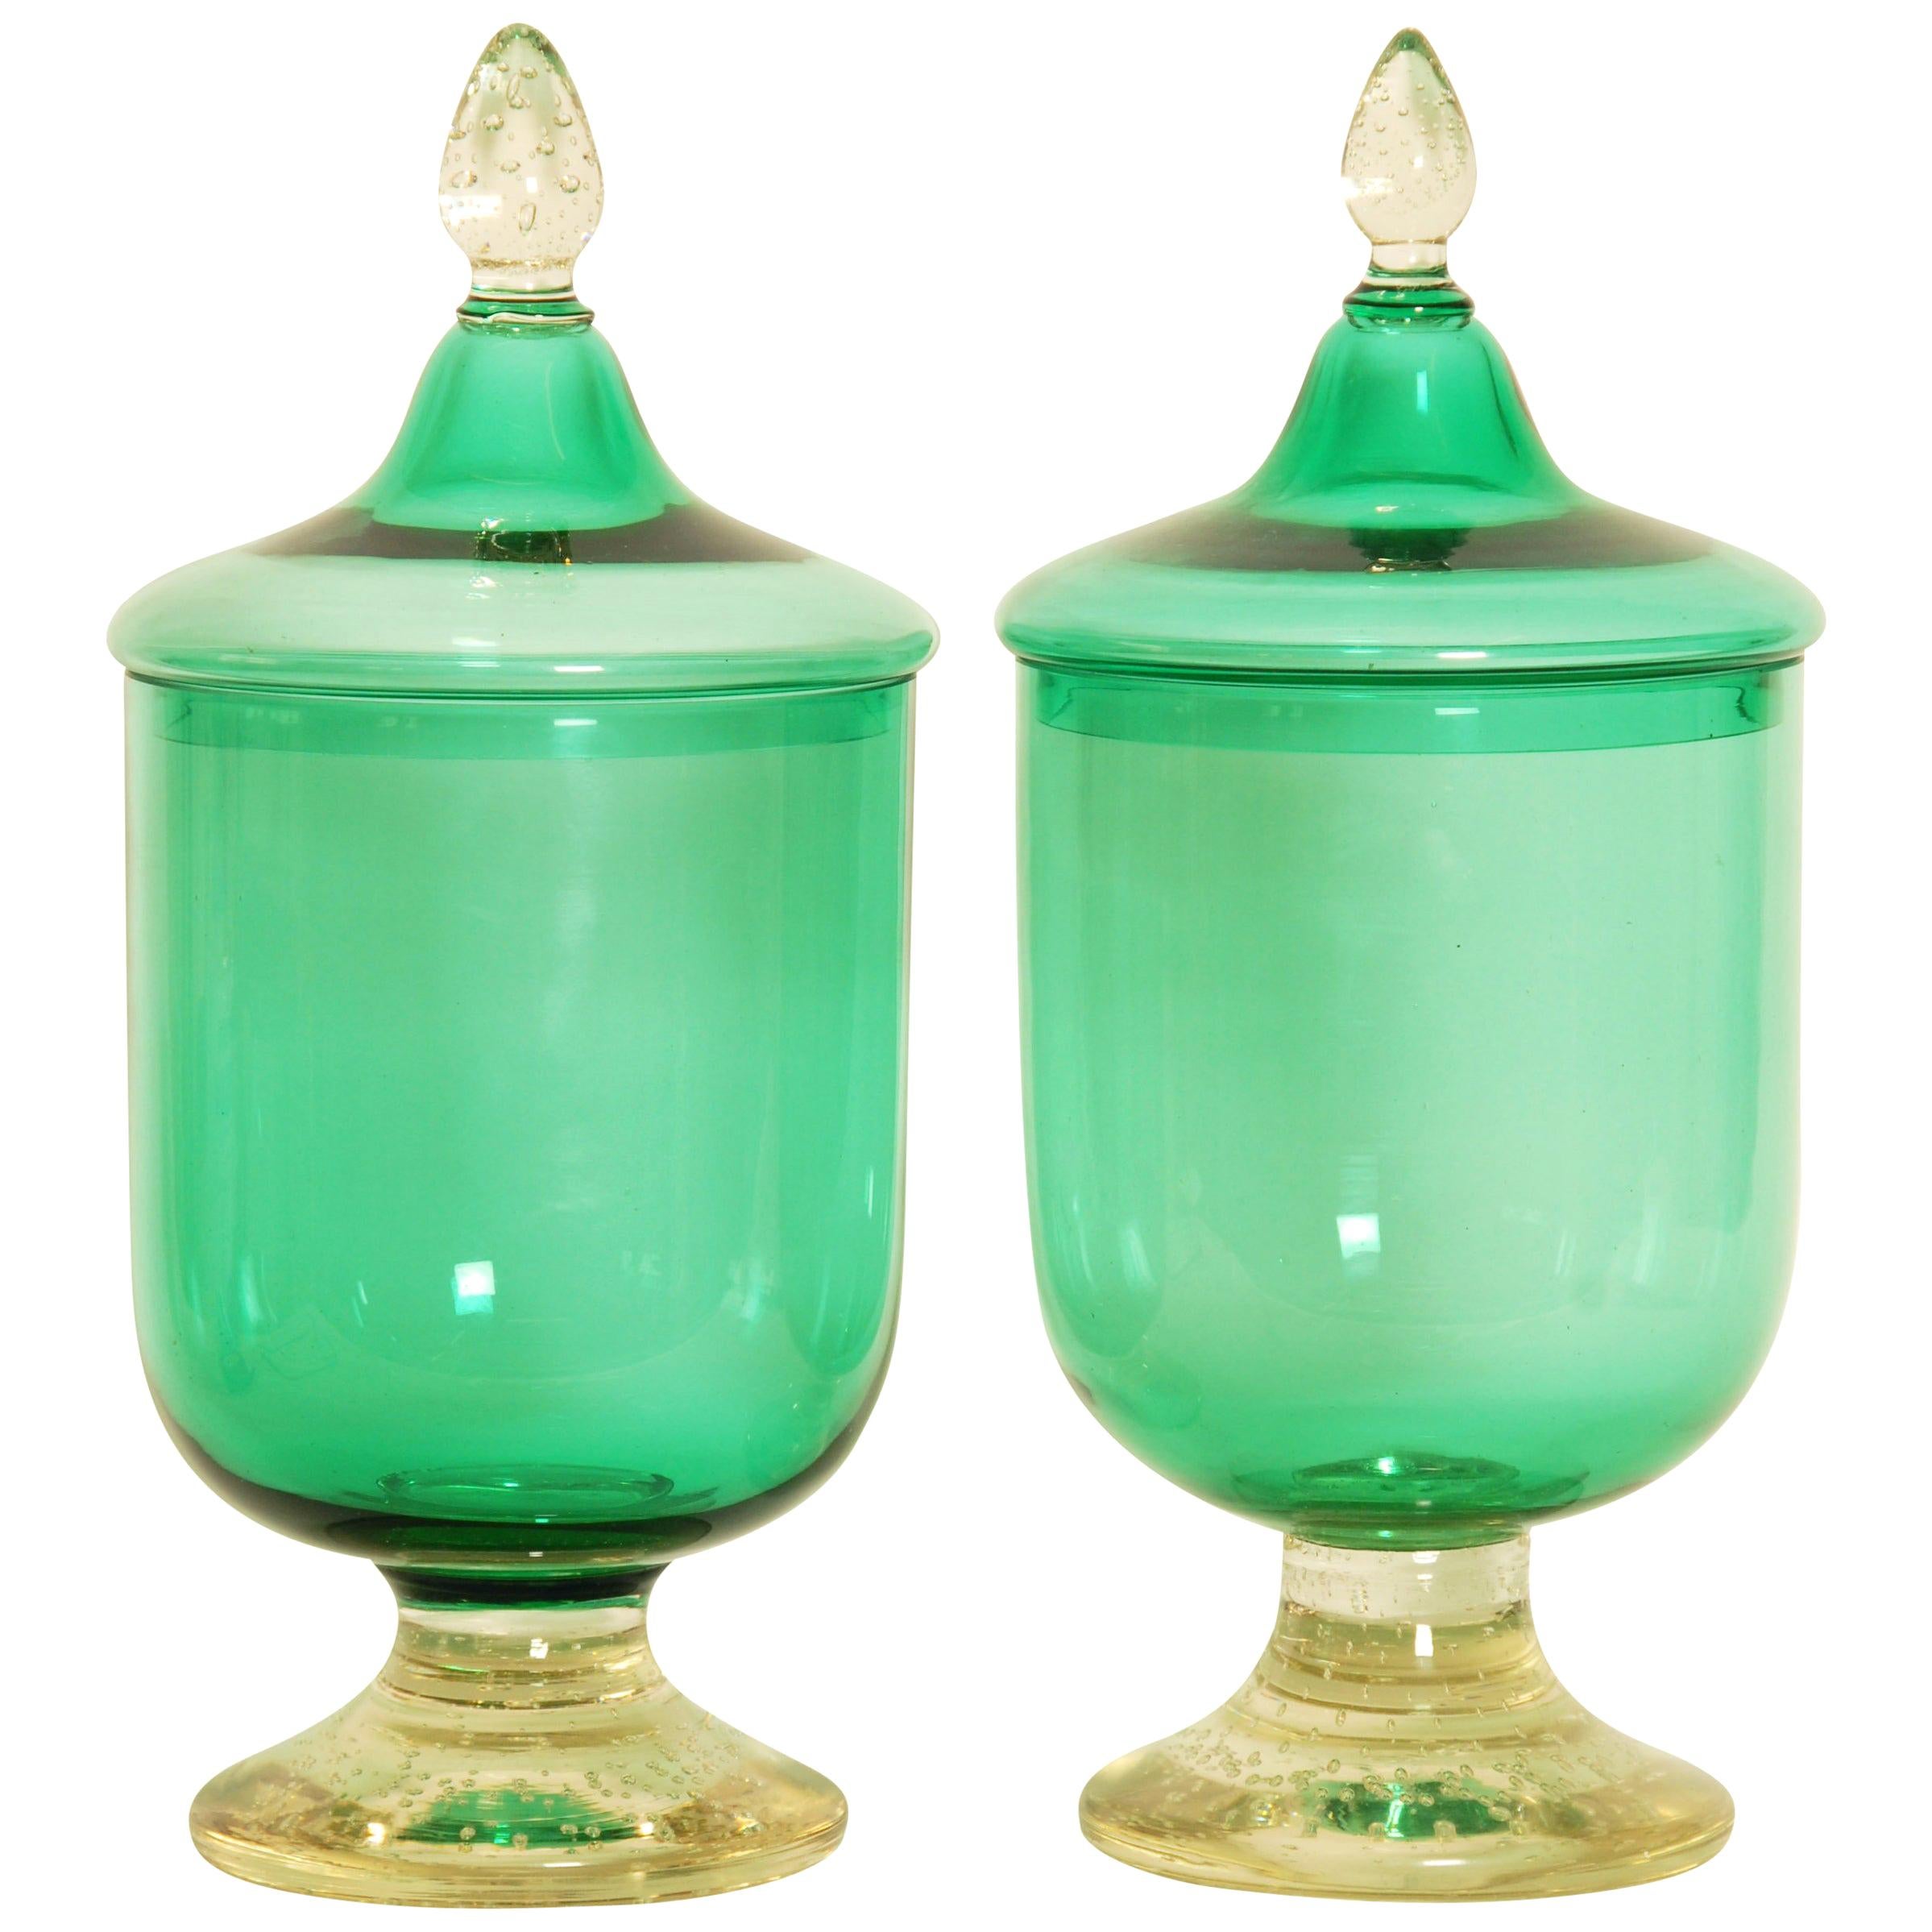 Pair of Murano Glass Lidded Urns or Vases For Sale